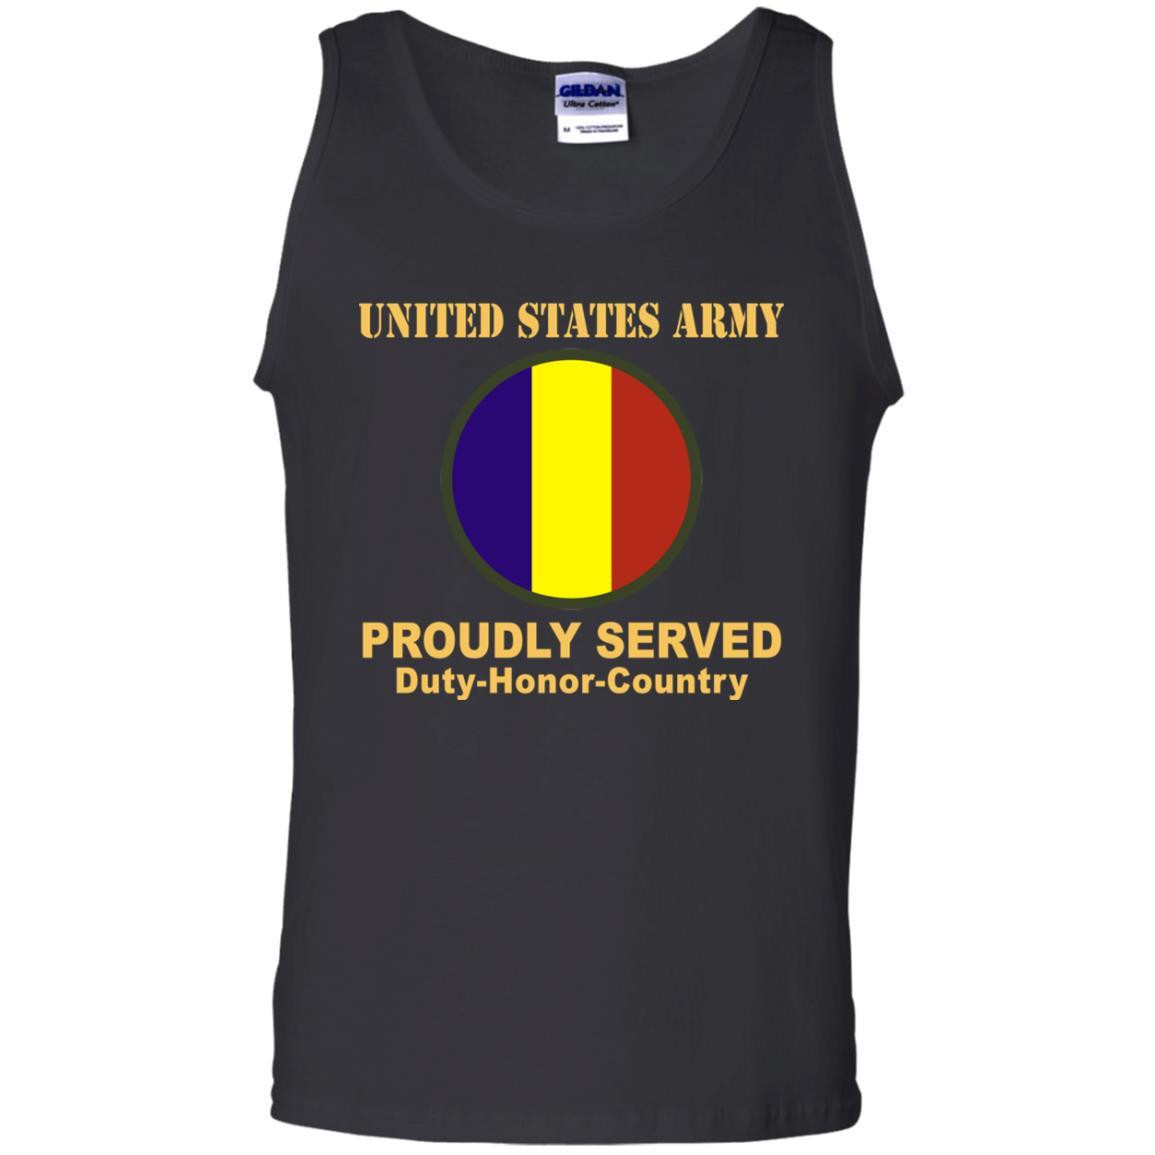 US ARMY TRAINING AND DOCTRINE COMMAND- Proudly Served T-Shirt On Front For Men-TShirt-Army-Veterans Nation